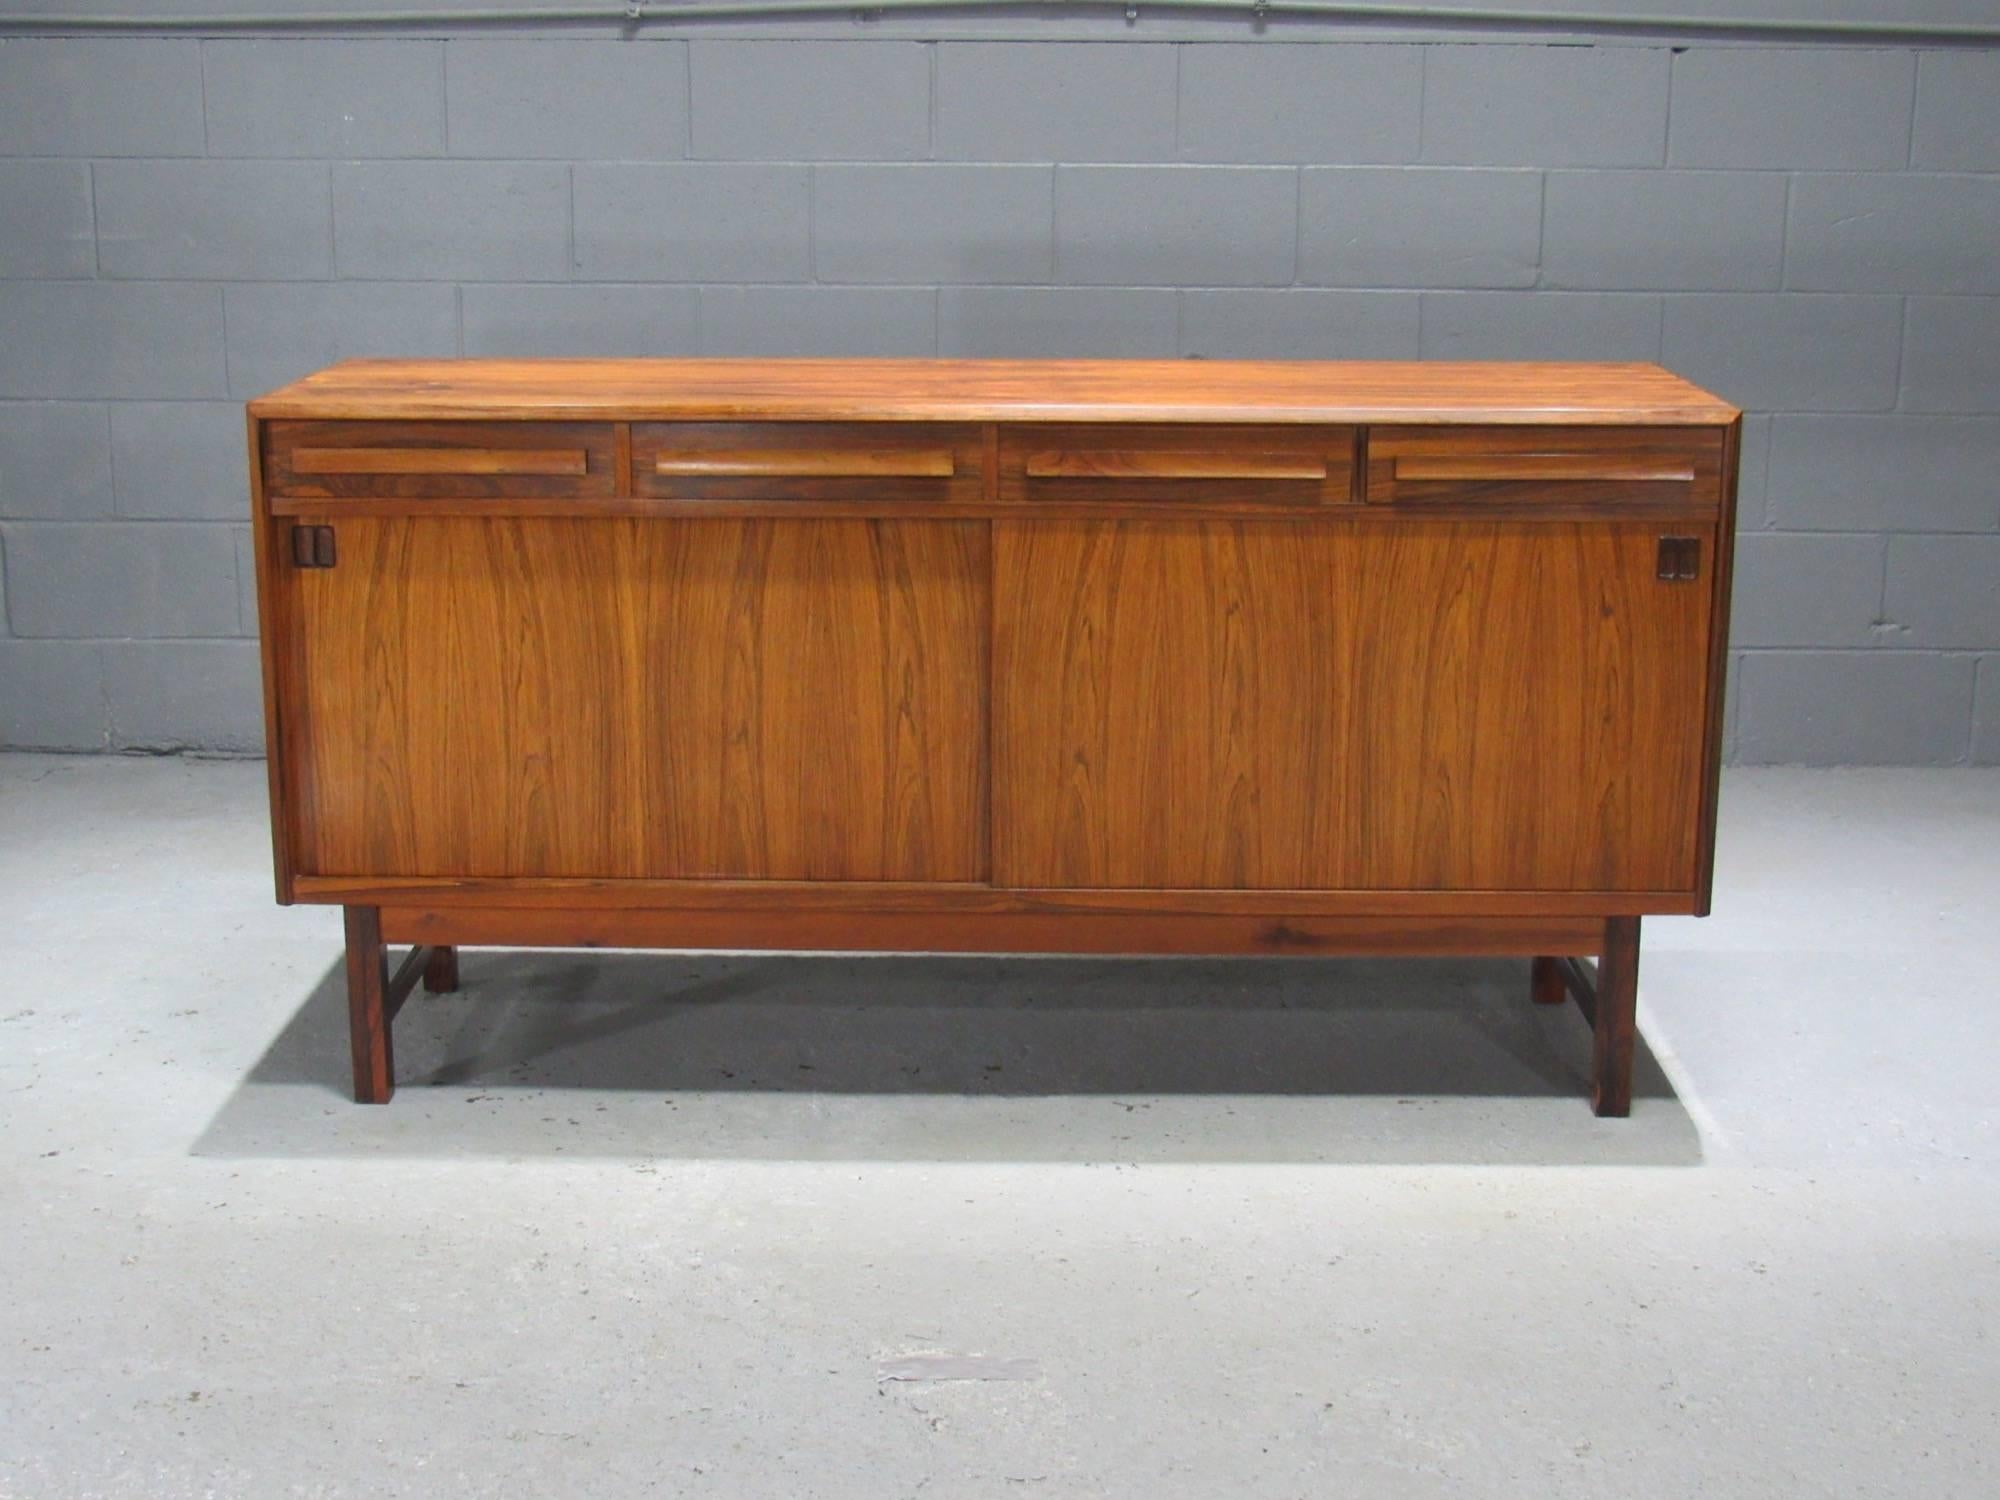 Danish Modern Rosewood Sideboard by Bordum OG Nielsen, This sideboard features a beautiful rosewood grain. With four drawers above two sliding doors which reveal ample storage and adjustable shelves. The right two drawers have felt-lined cutlery